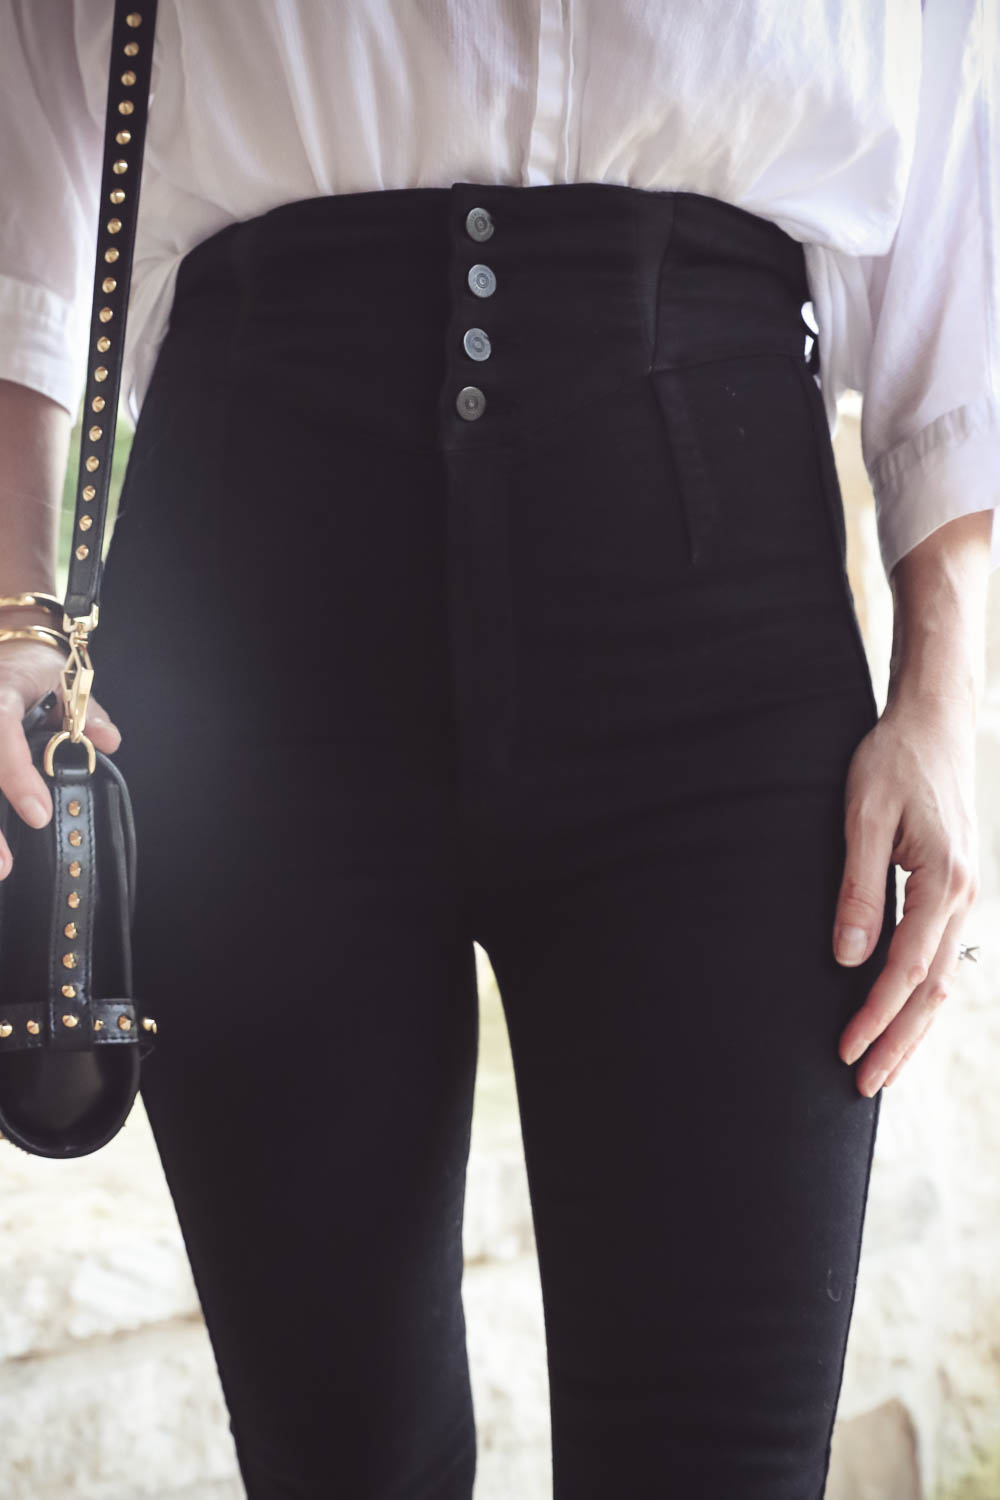 Corset jeans by Citizens of Humanity in black, high waist, high rise skinny jeans, vince camuto peep toe black mules, loft softened white cotton shirt, giles and brother gold cuff on Erin Busbee, fashion blogger and youtuber, fashion over 40